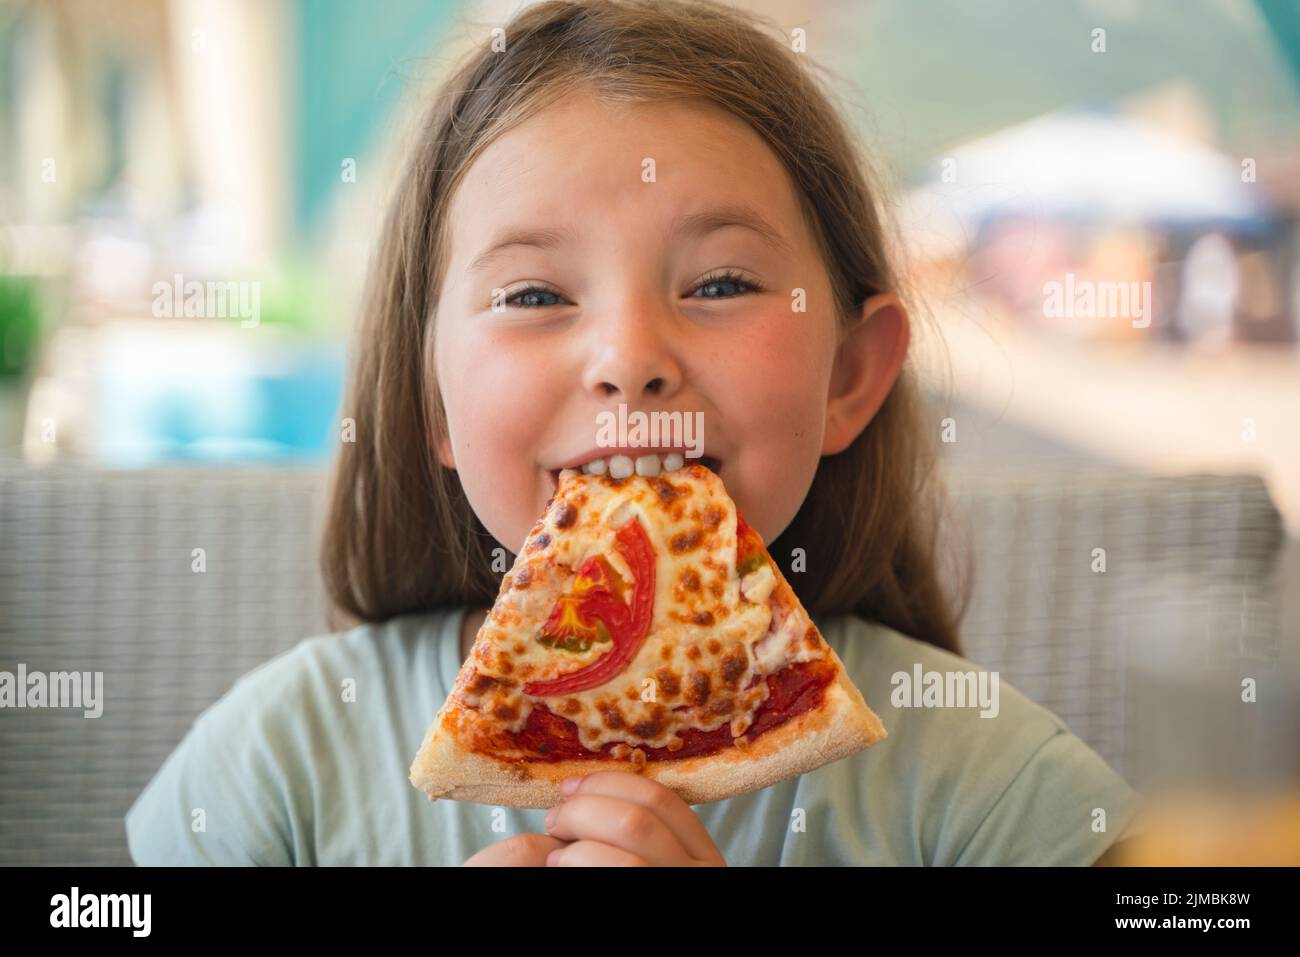 A young girl with plaits is eating a piece of pizza. High quality photo Stock Photo